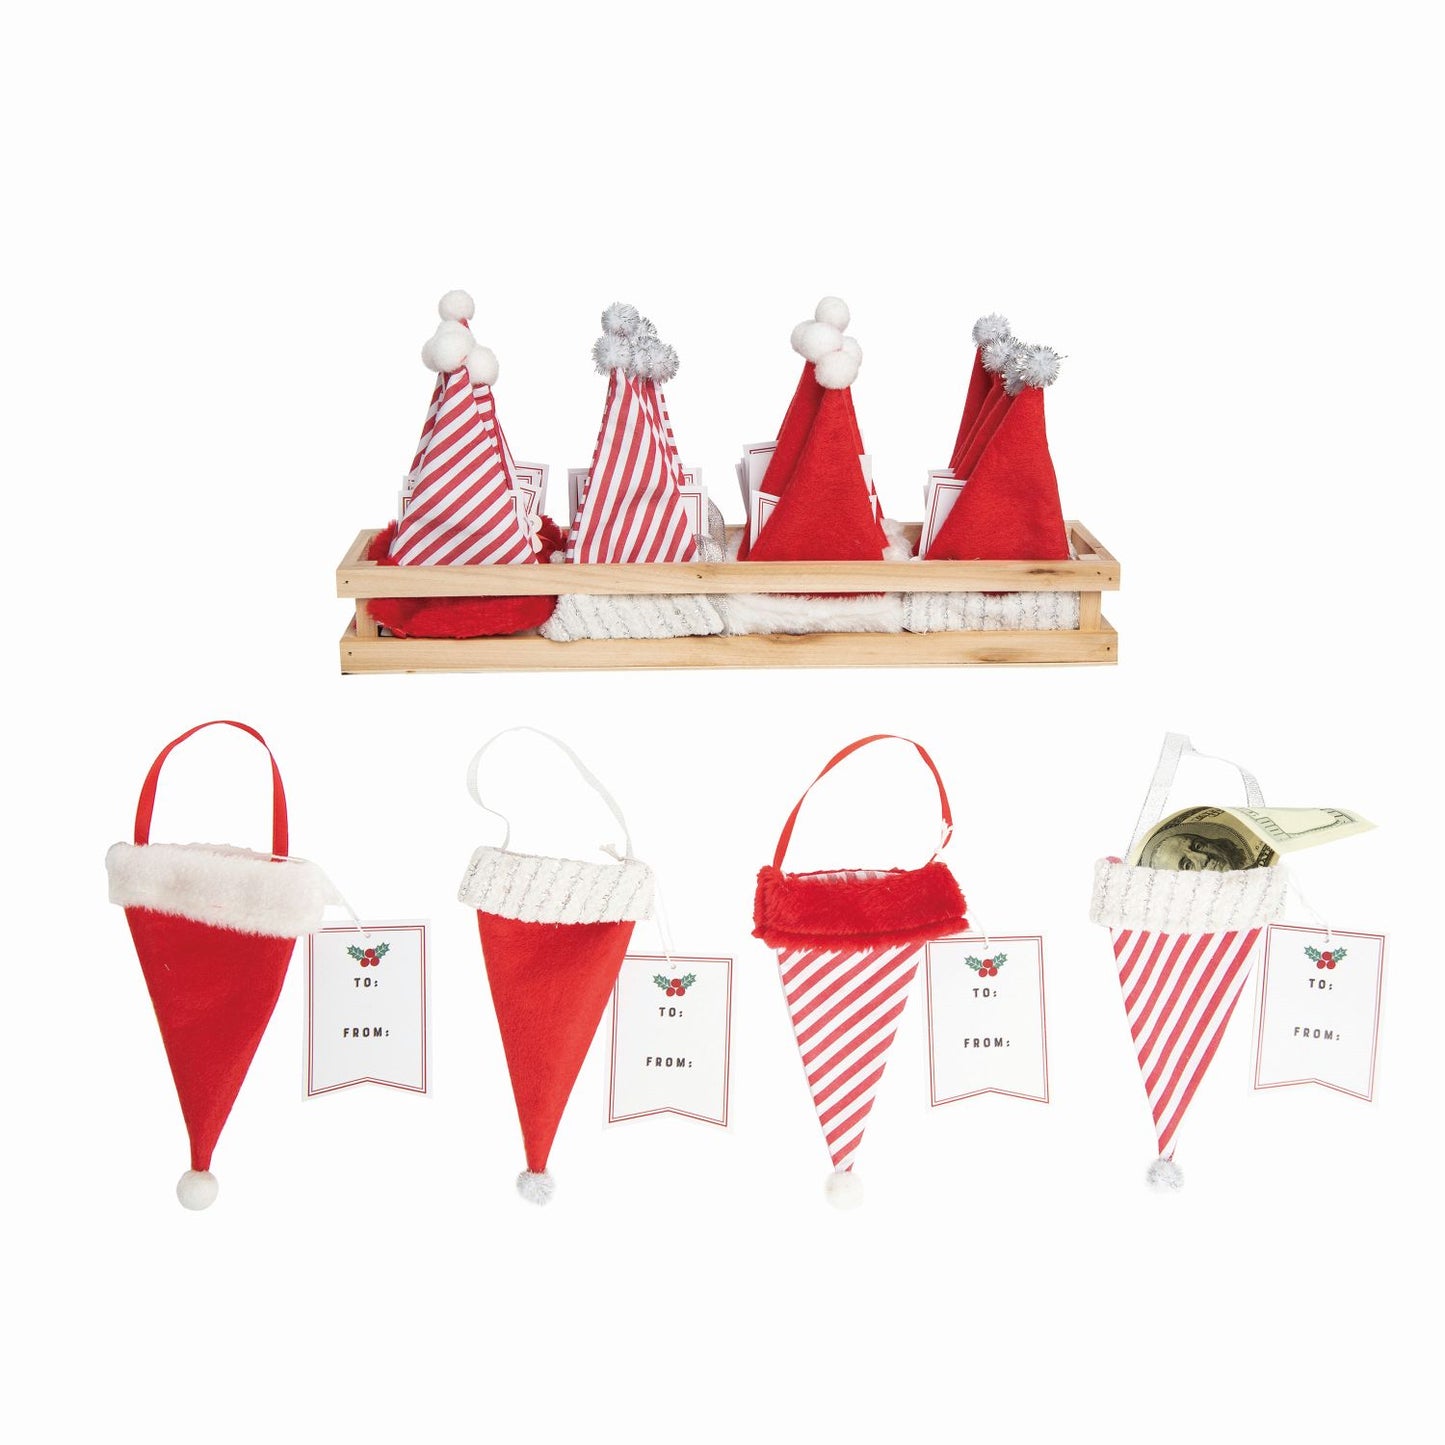 Fabric Hanging Santa Hat Ornament With Gift Tag In Wood Crate, Set Of 24